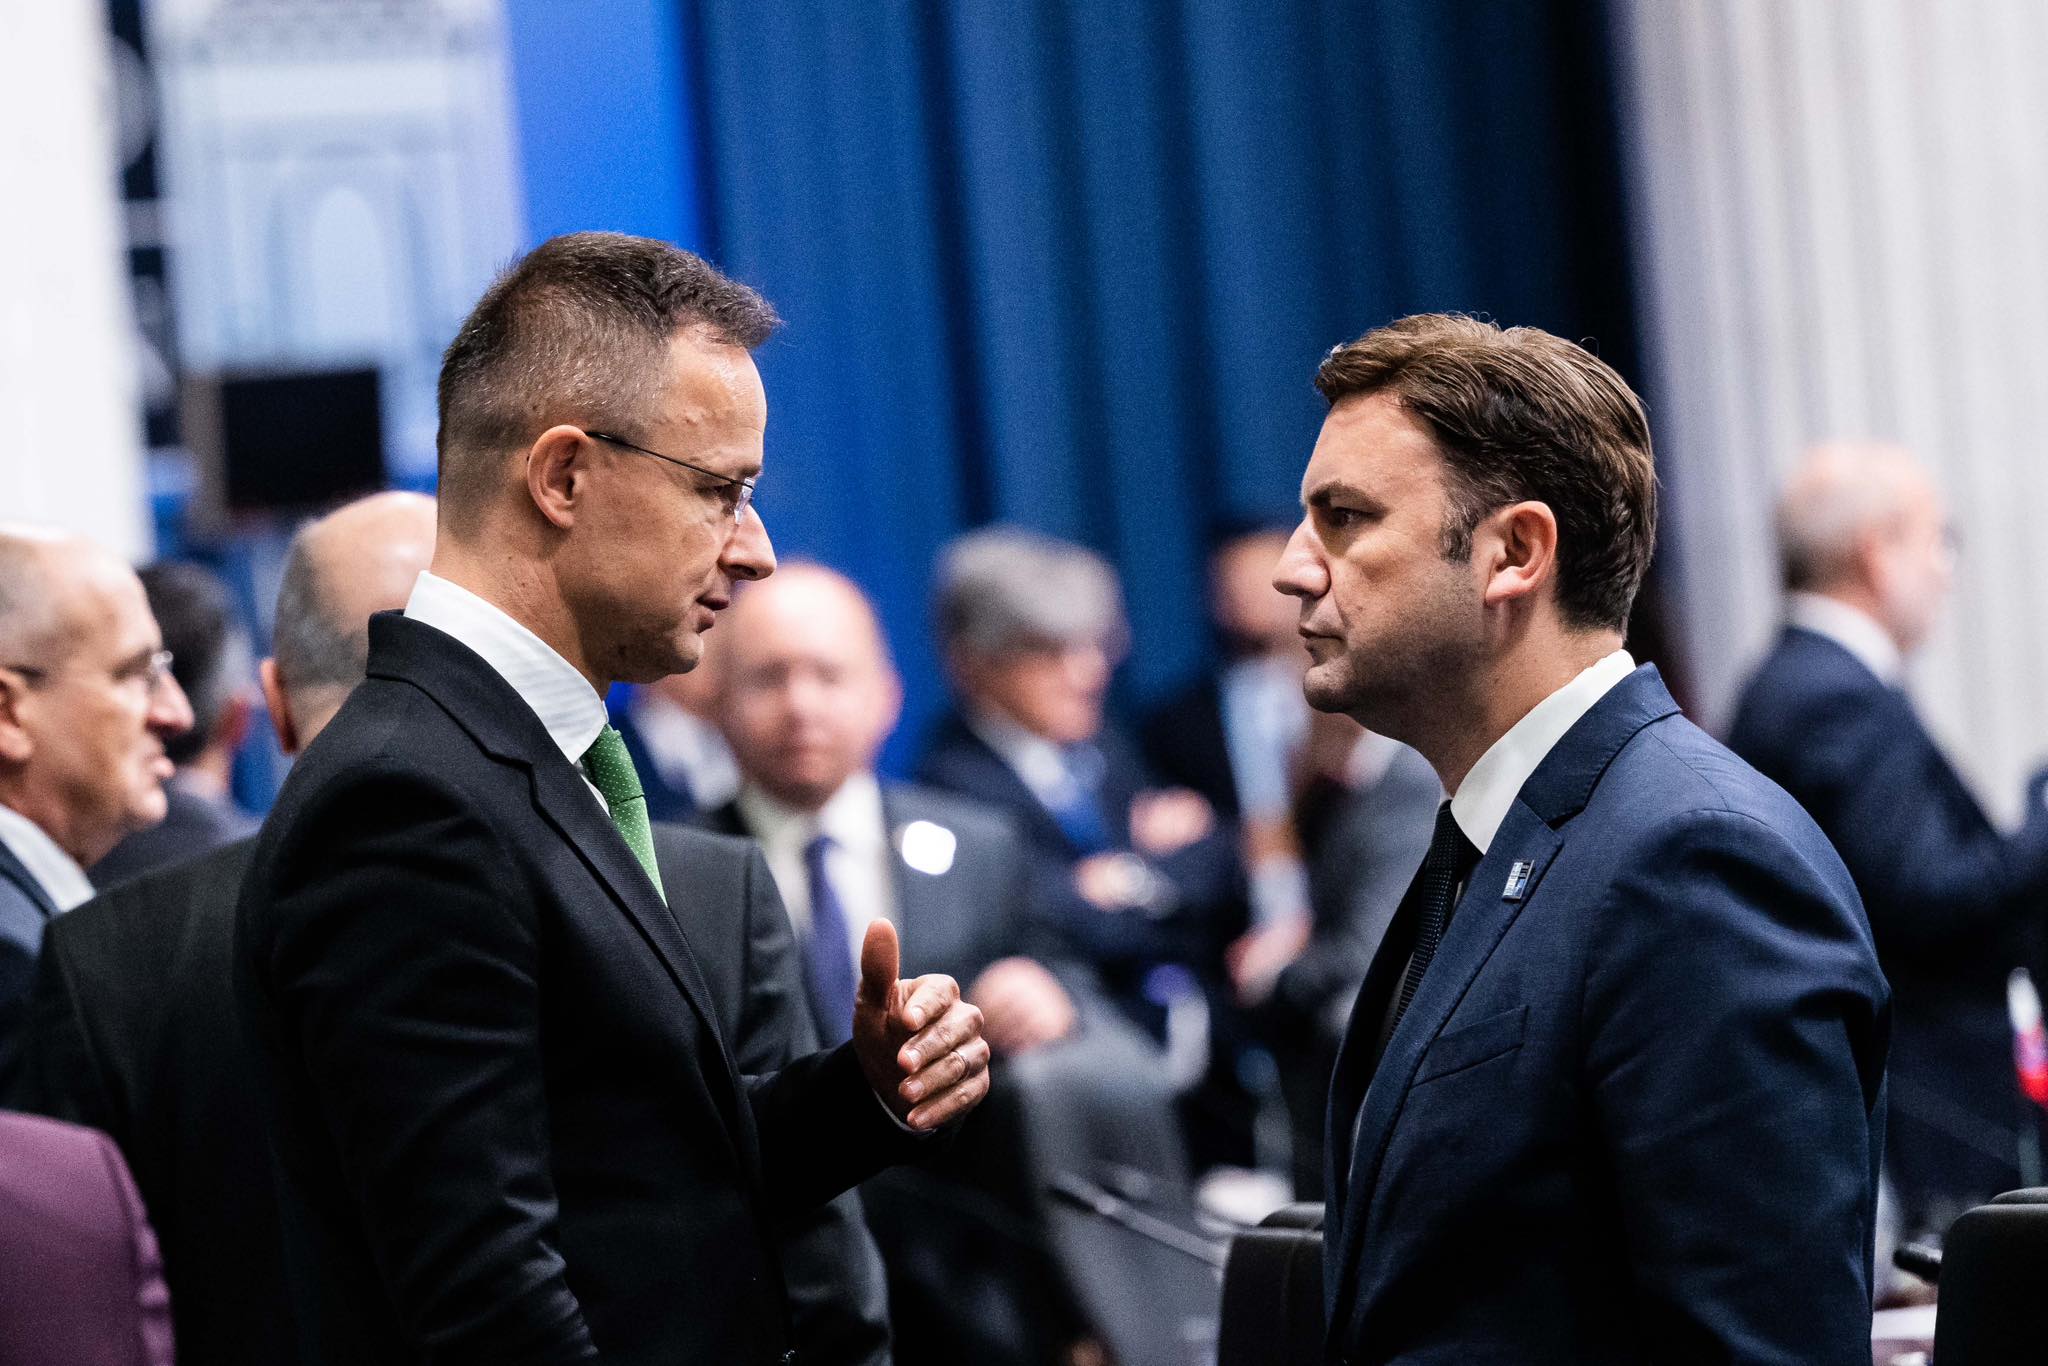 Watch: Hungary's FM Says 'We Want Peace, Not Another Sanctions Package'